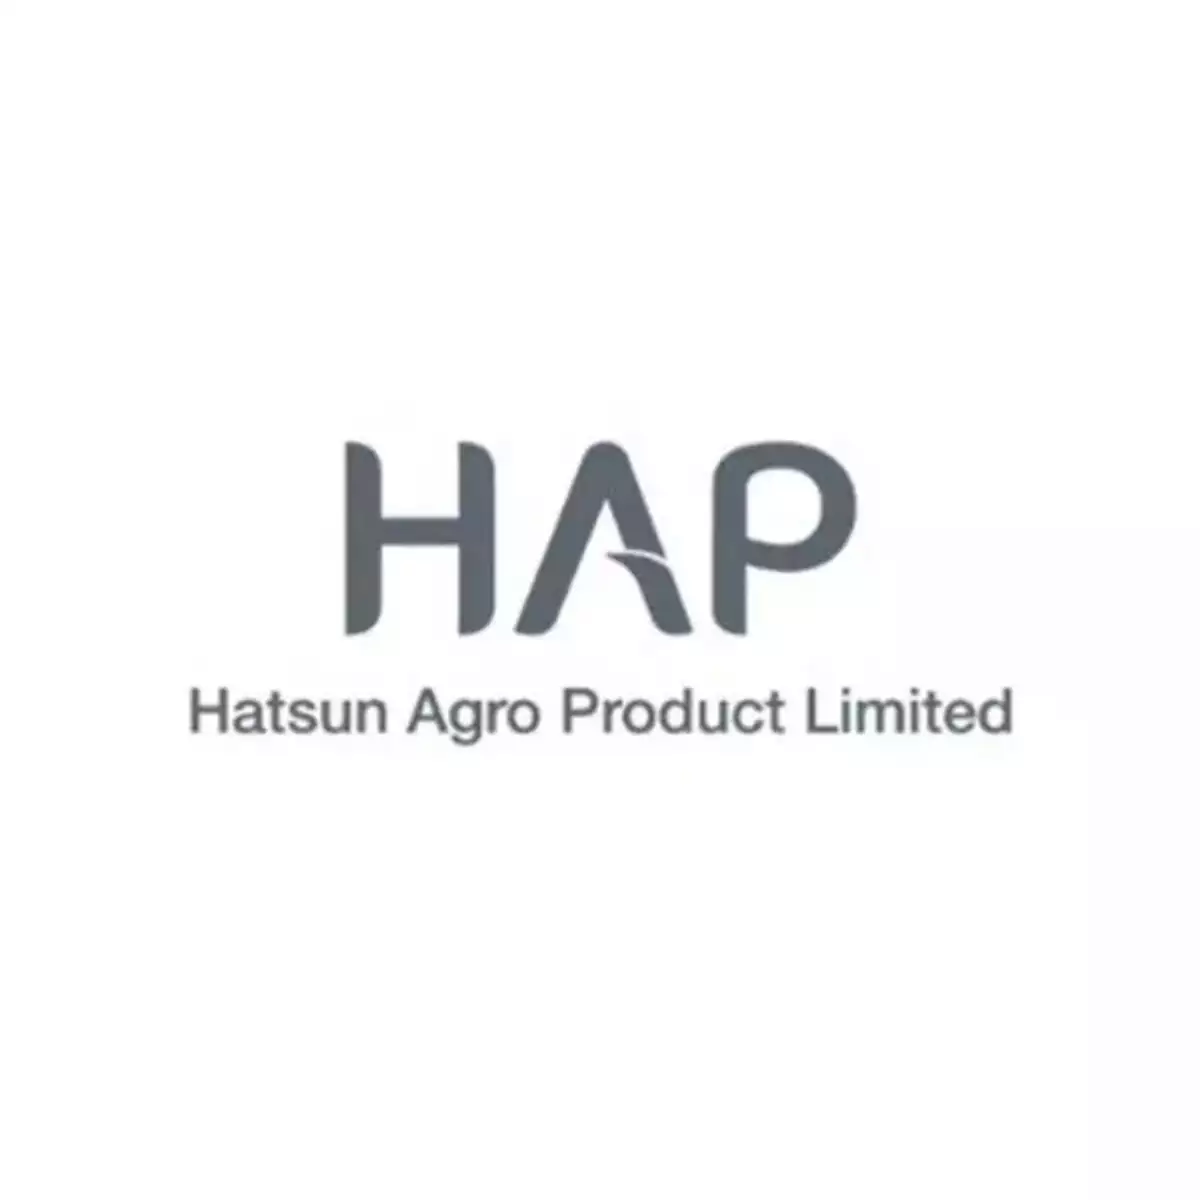 Hatsun Agro skyrockets 18% on solid all-round show in Q1